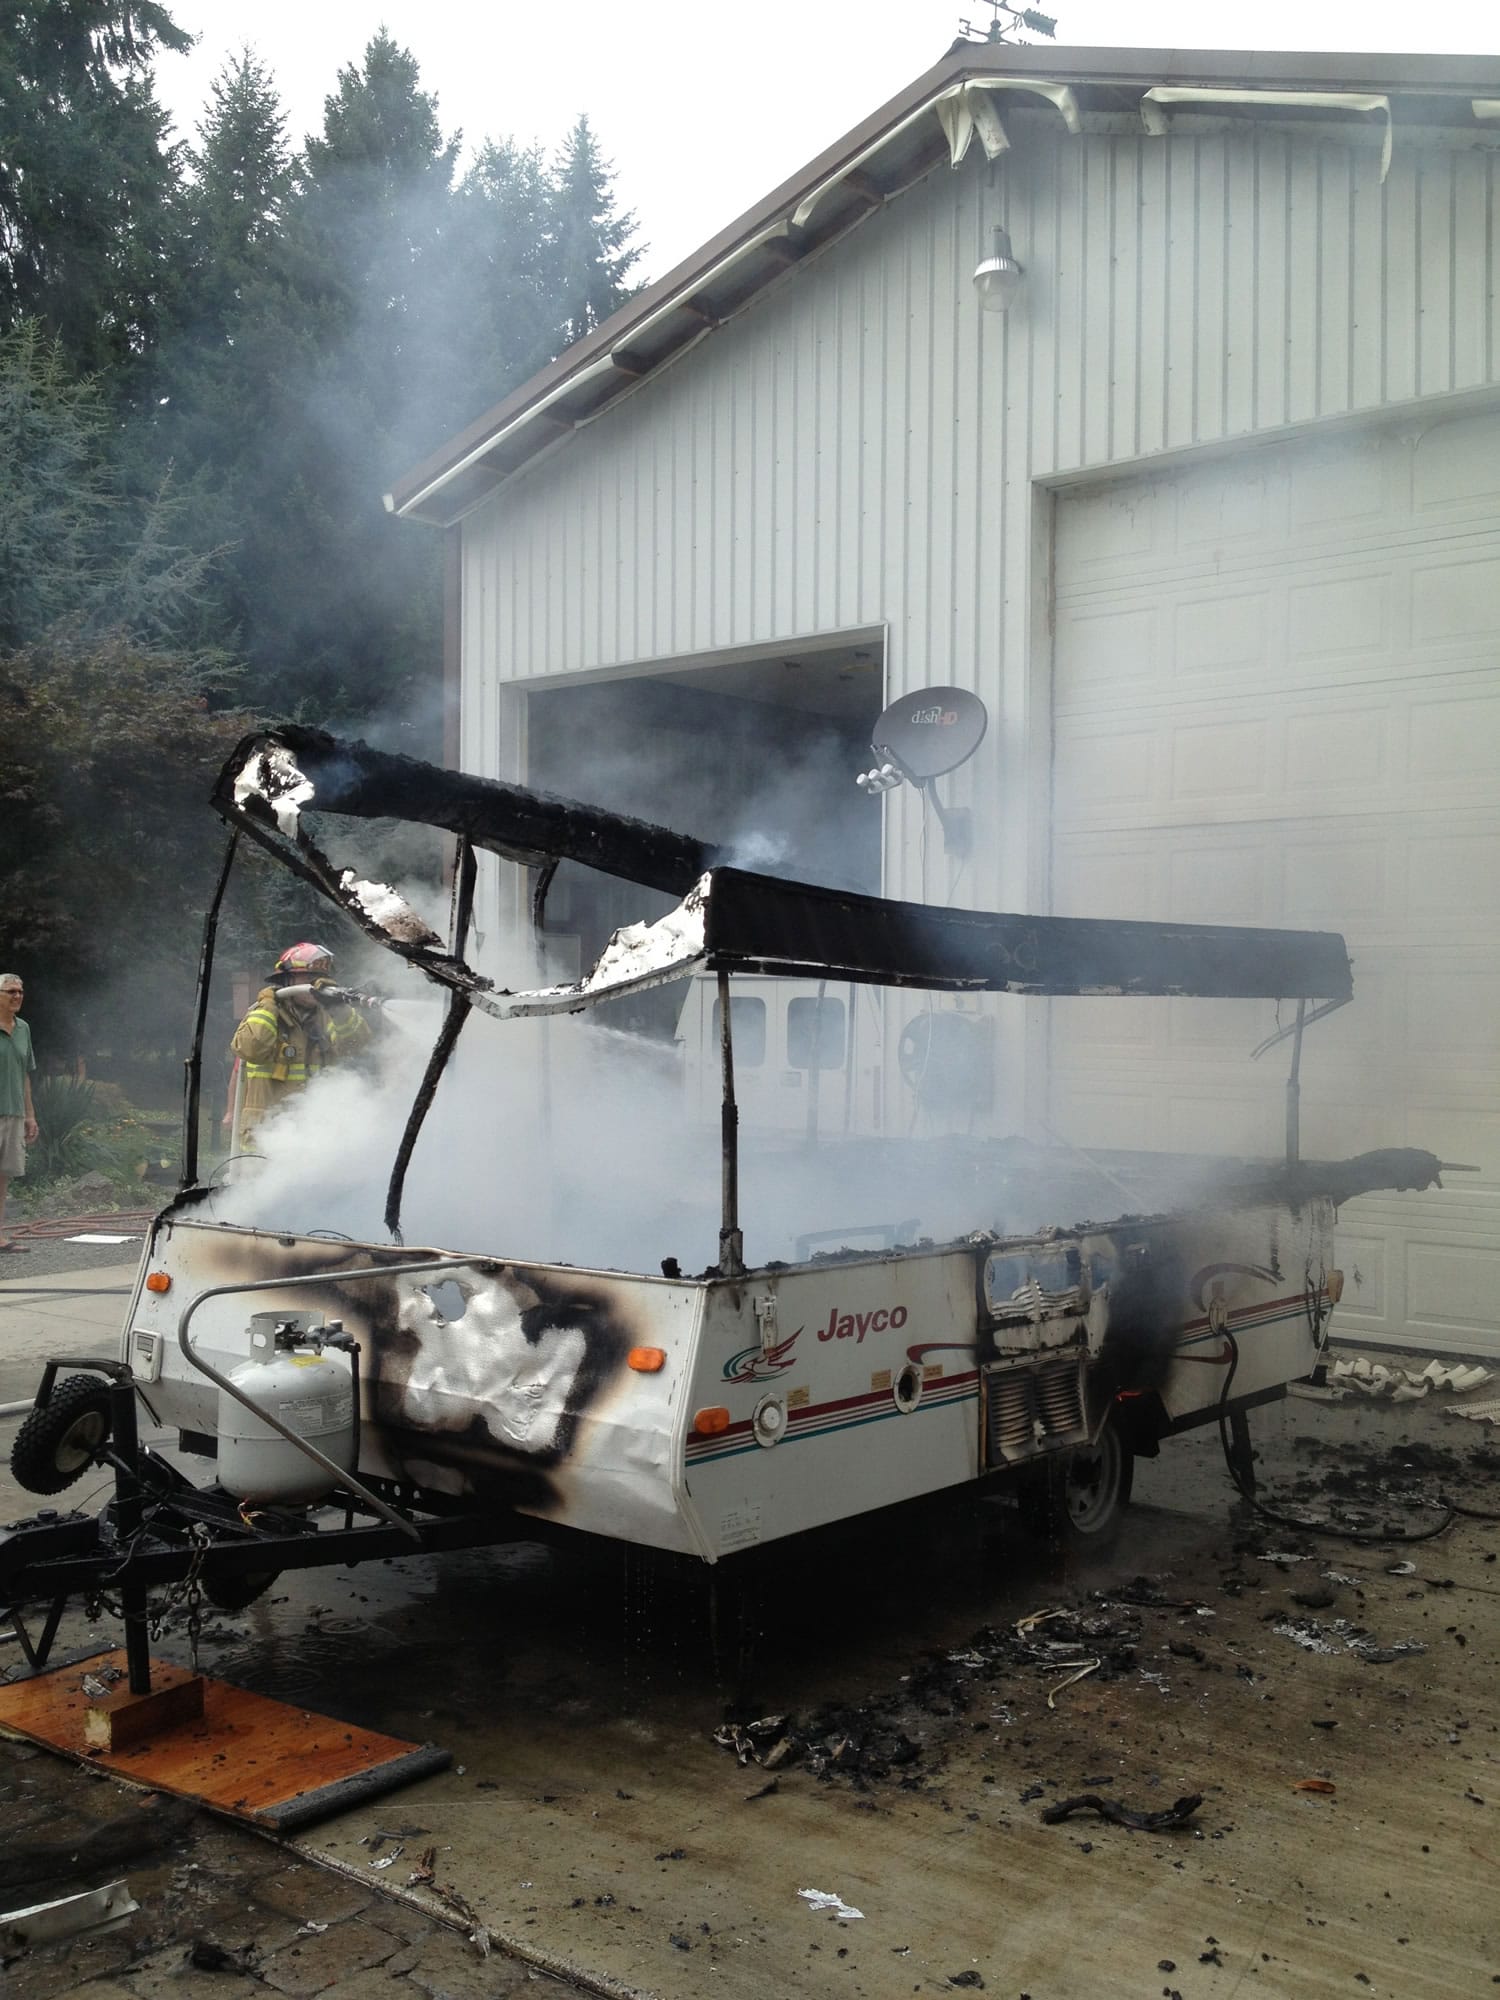 Firefighters spray down a pop-up camping trailer that caught fire at a residence in Ridgefield.